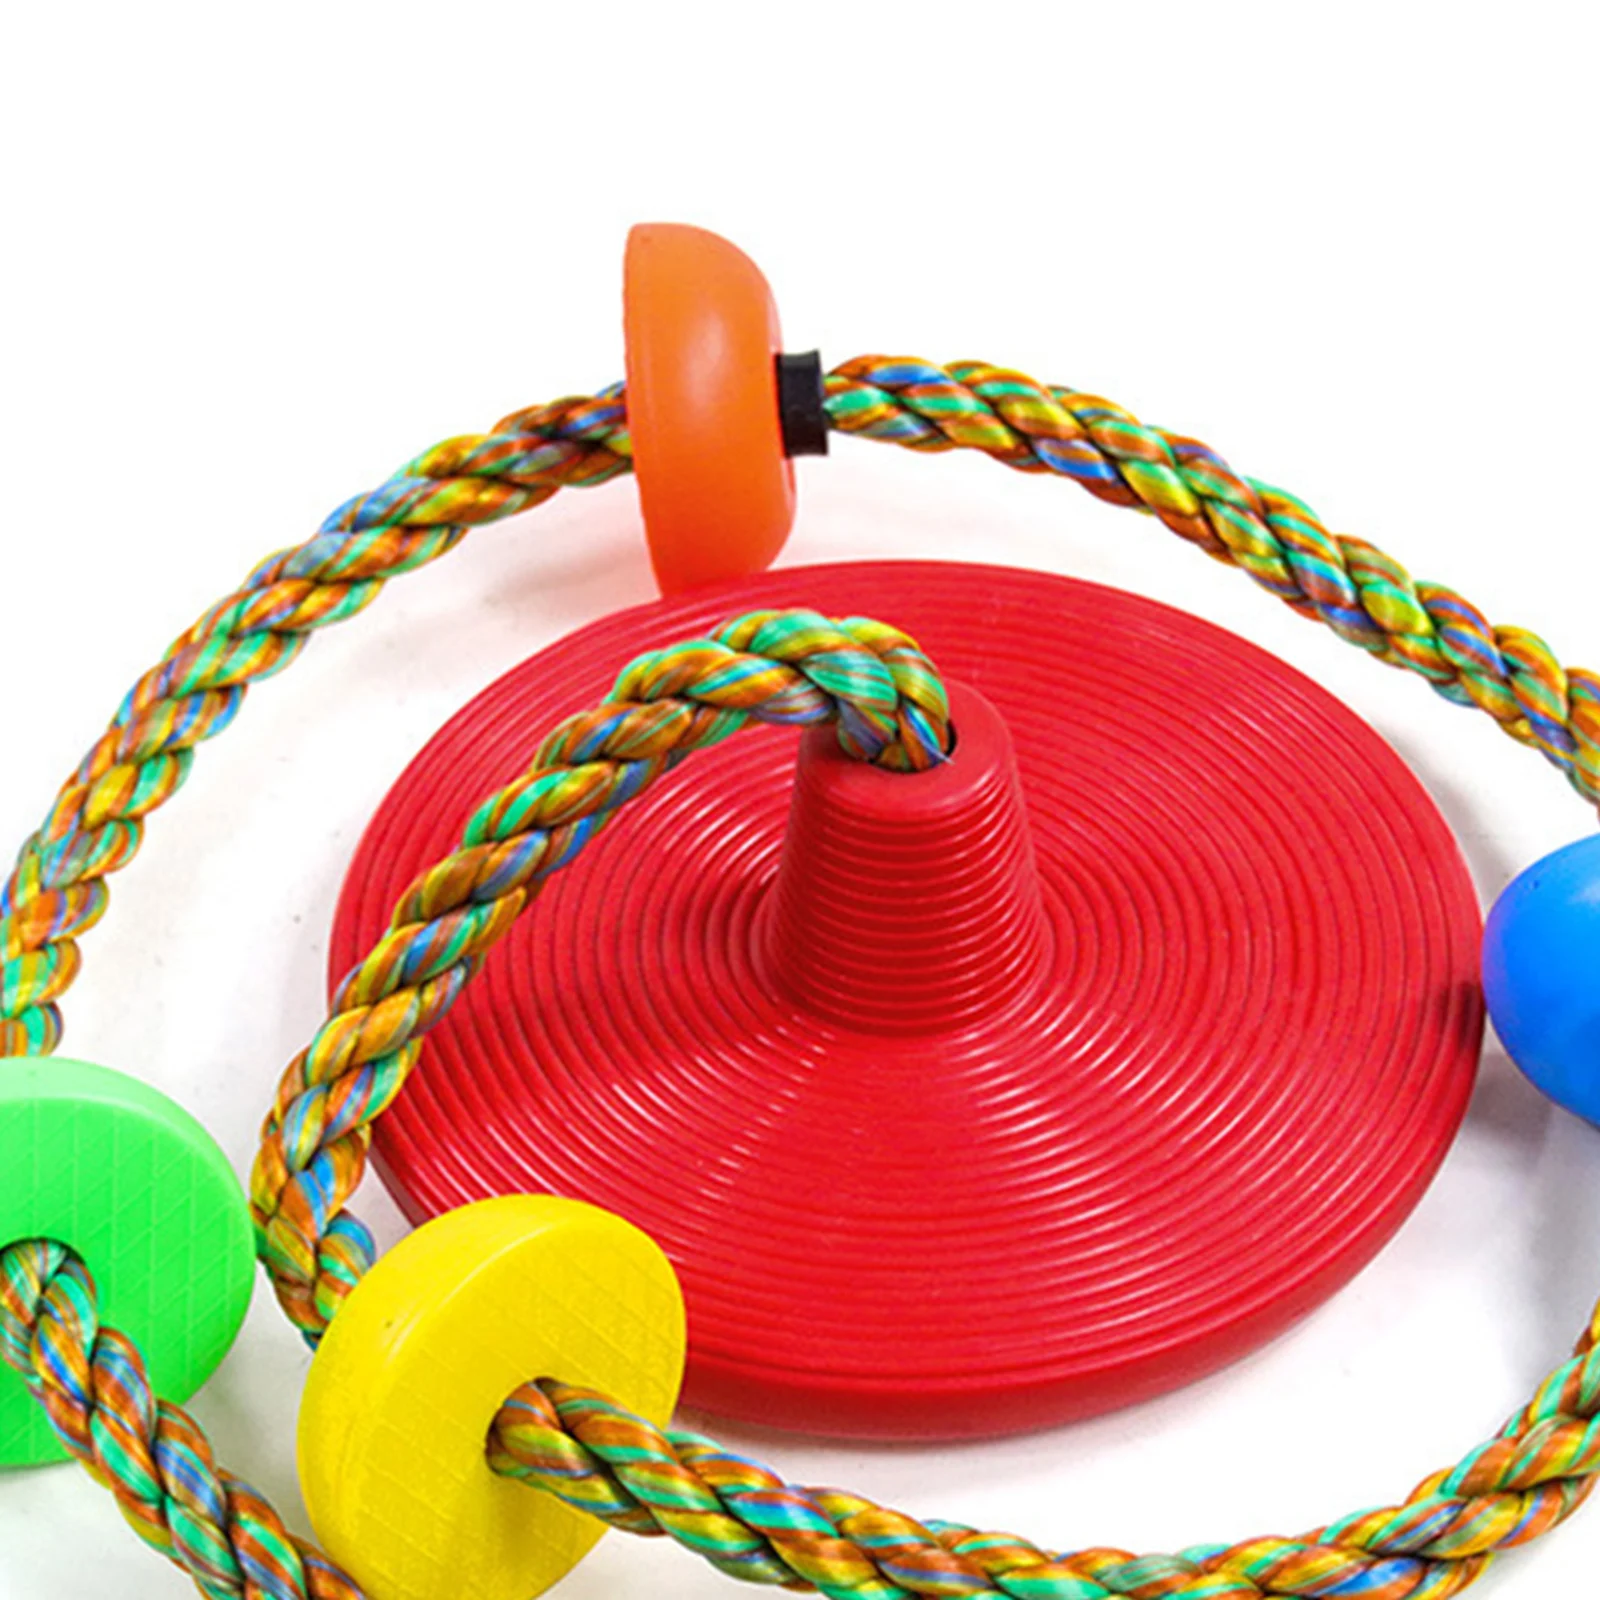 Rotating Swing Plastic Rainbow Portable Safe Fun Equipment Whirlwind Rope Climbing Rope Swing Swing Seat for Outdoor Garden Kids